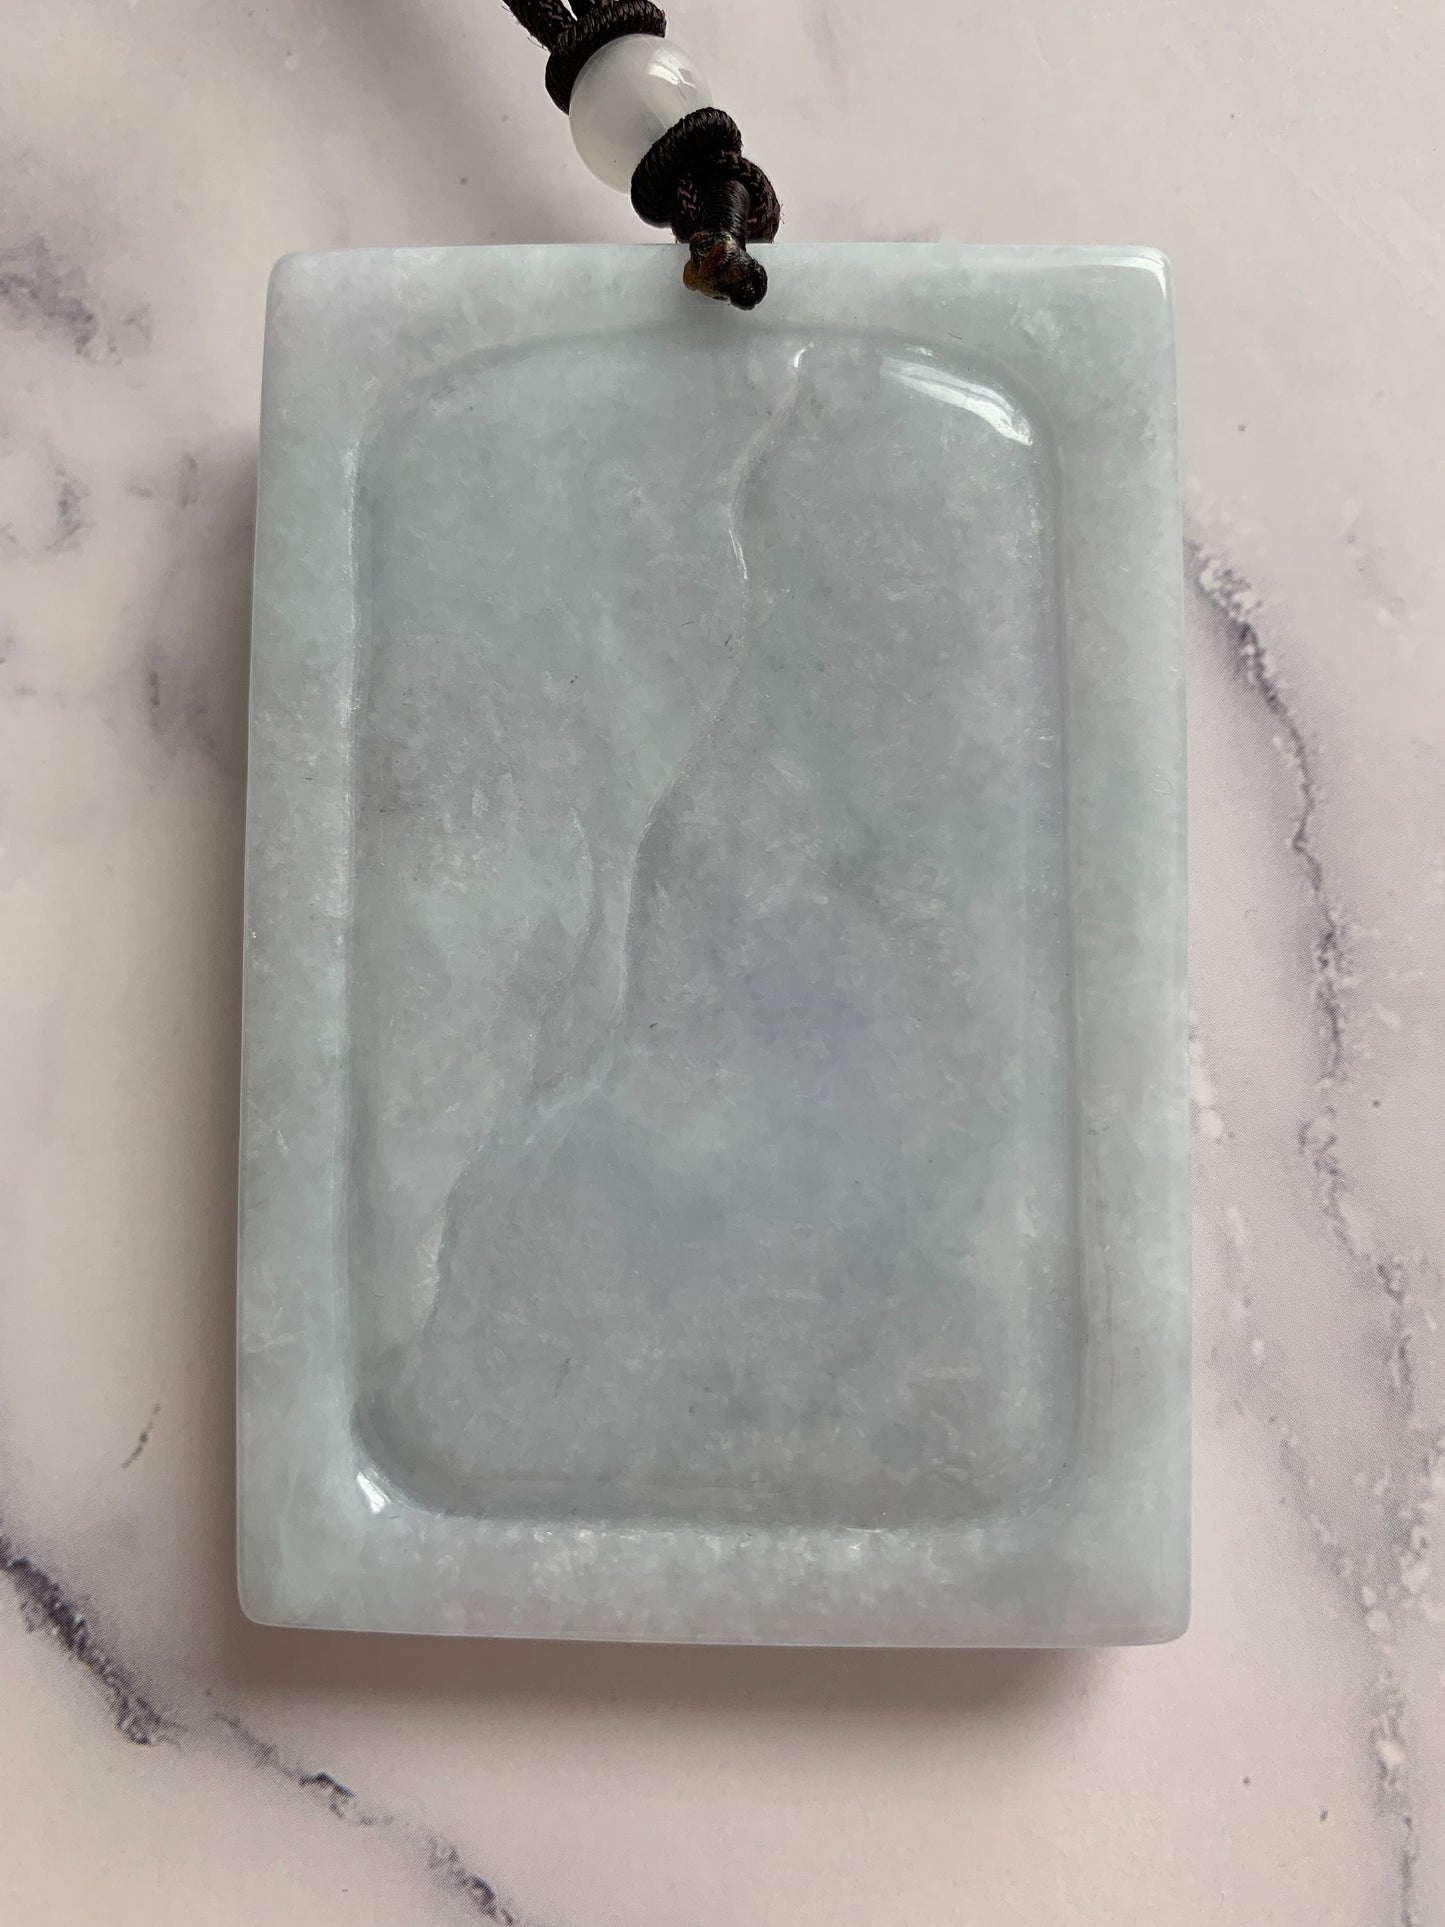 Large Horse Jade Jadeite Chinese Zodiac Carved Pendant Necklace, YJ-0321-0330675 - AriaDesignCollection